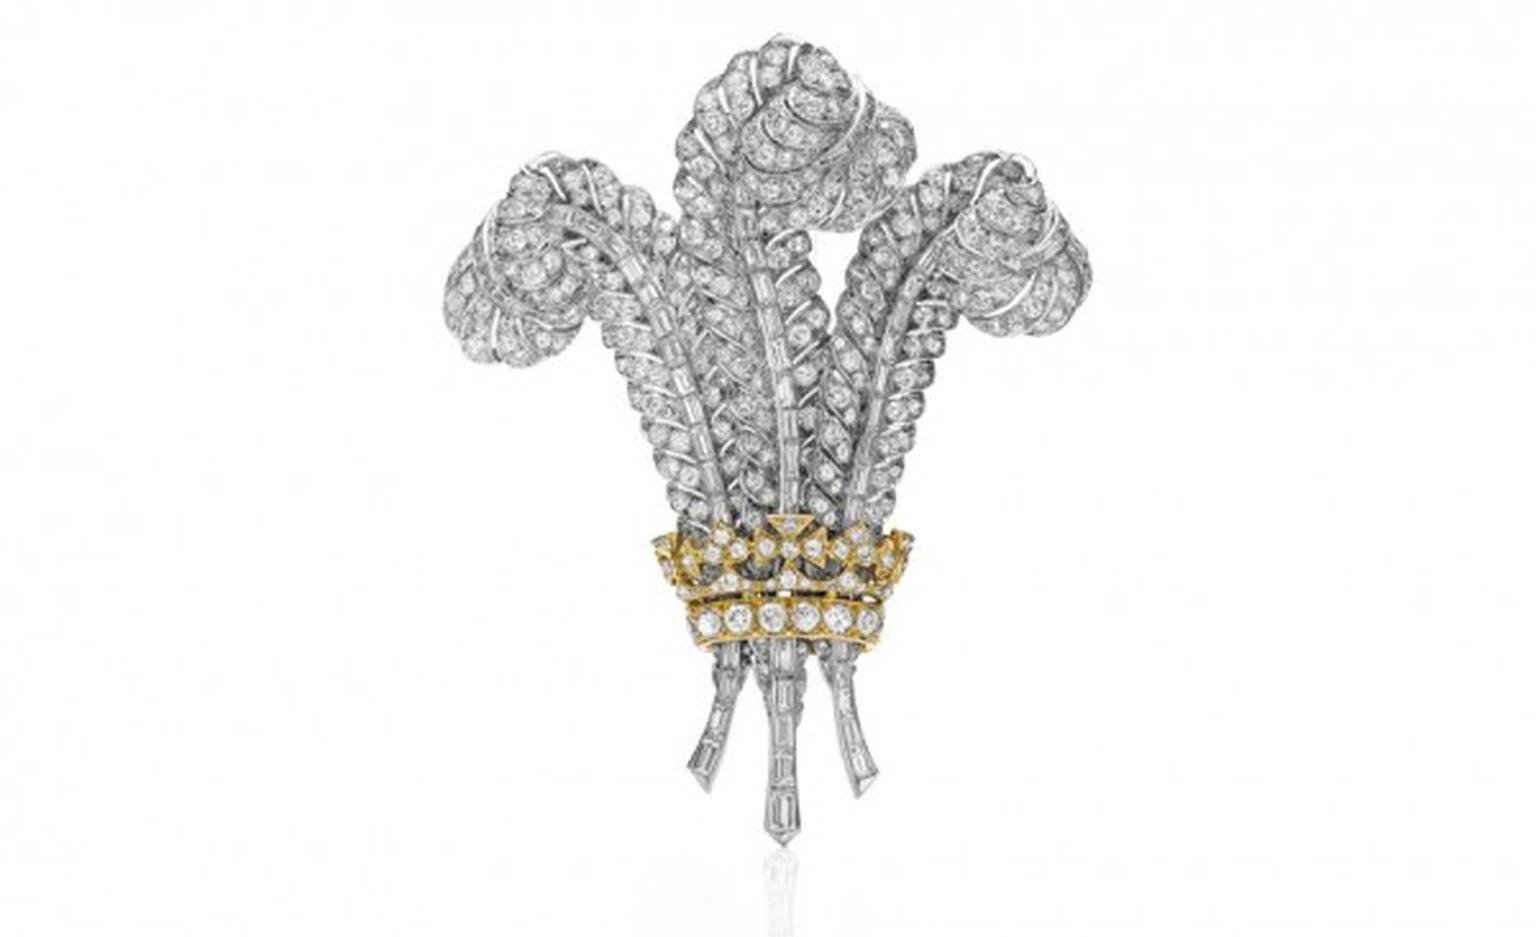 Prince of Wales brooch once belonged to the Duchess of Windsor.